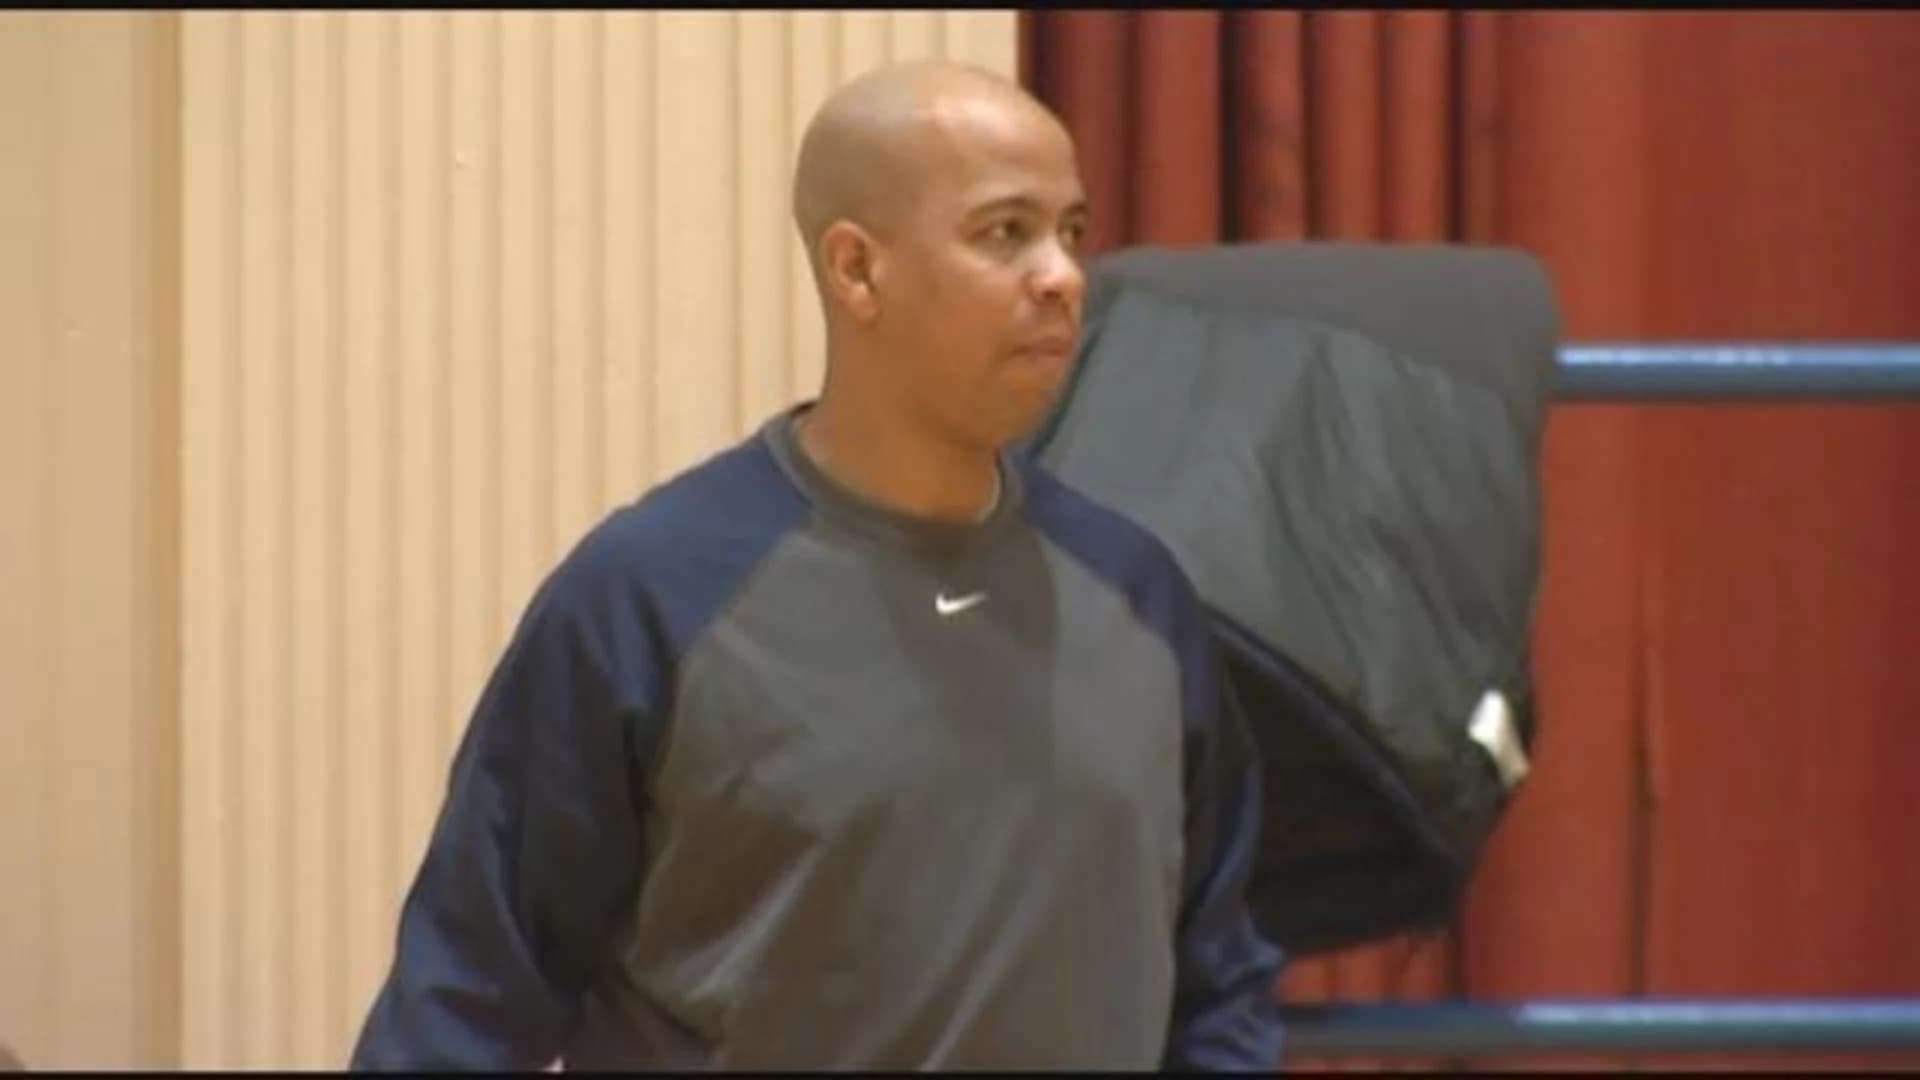 High school basketball coach charged with shooting player's parent